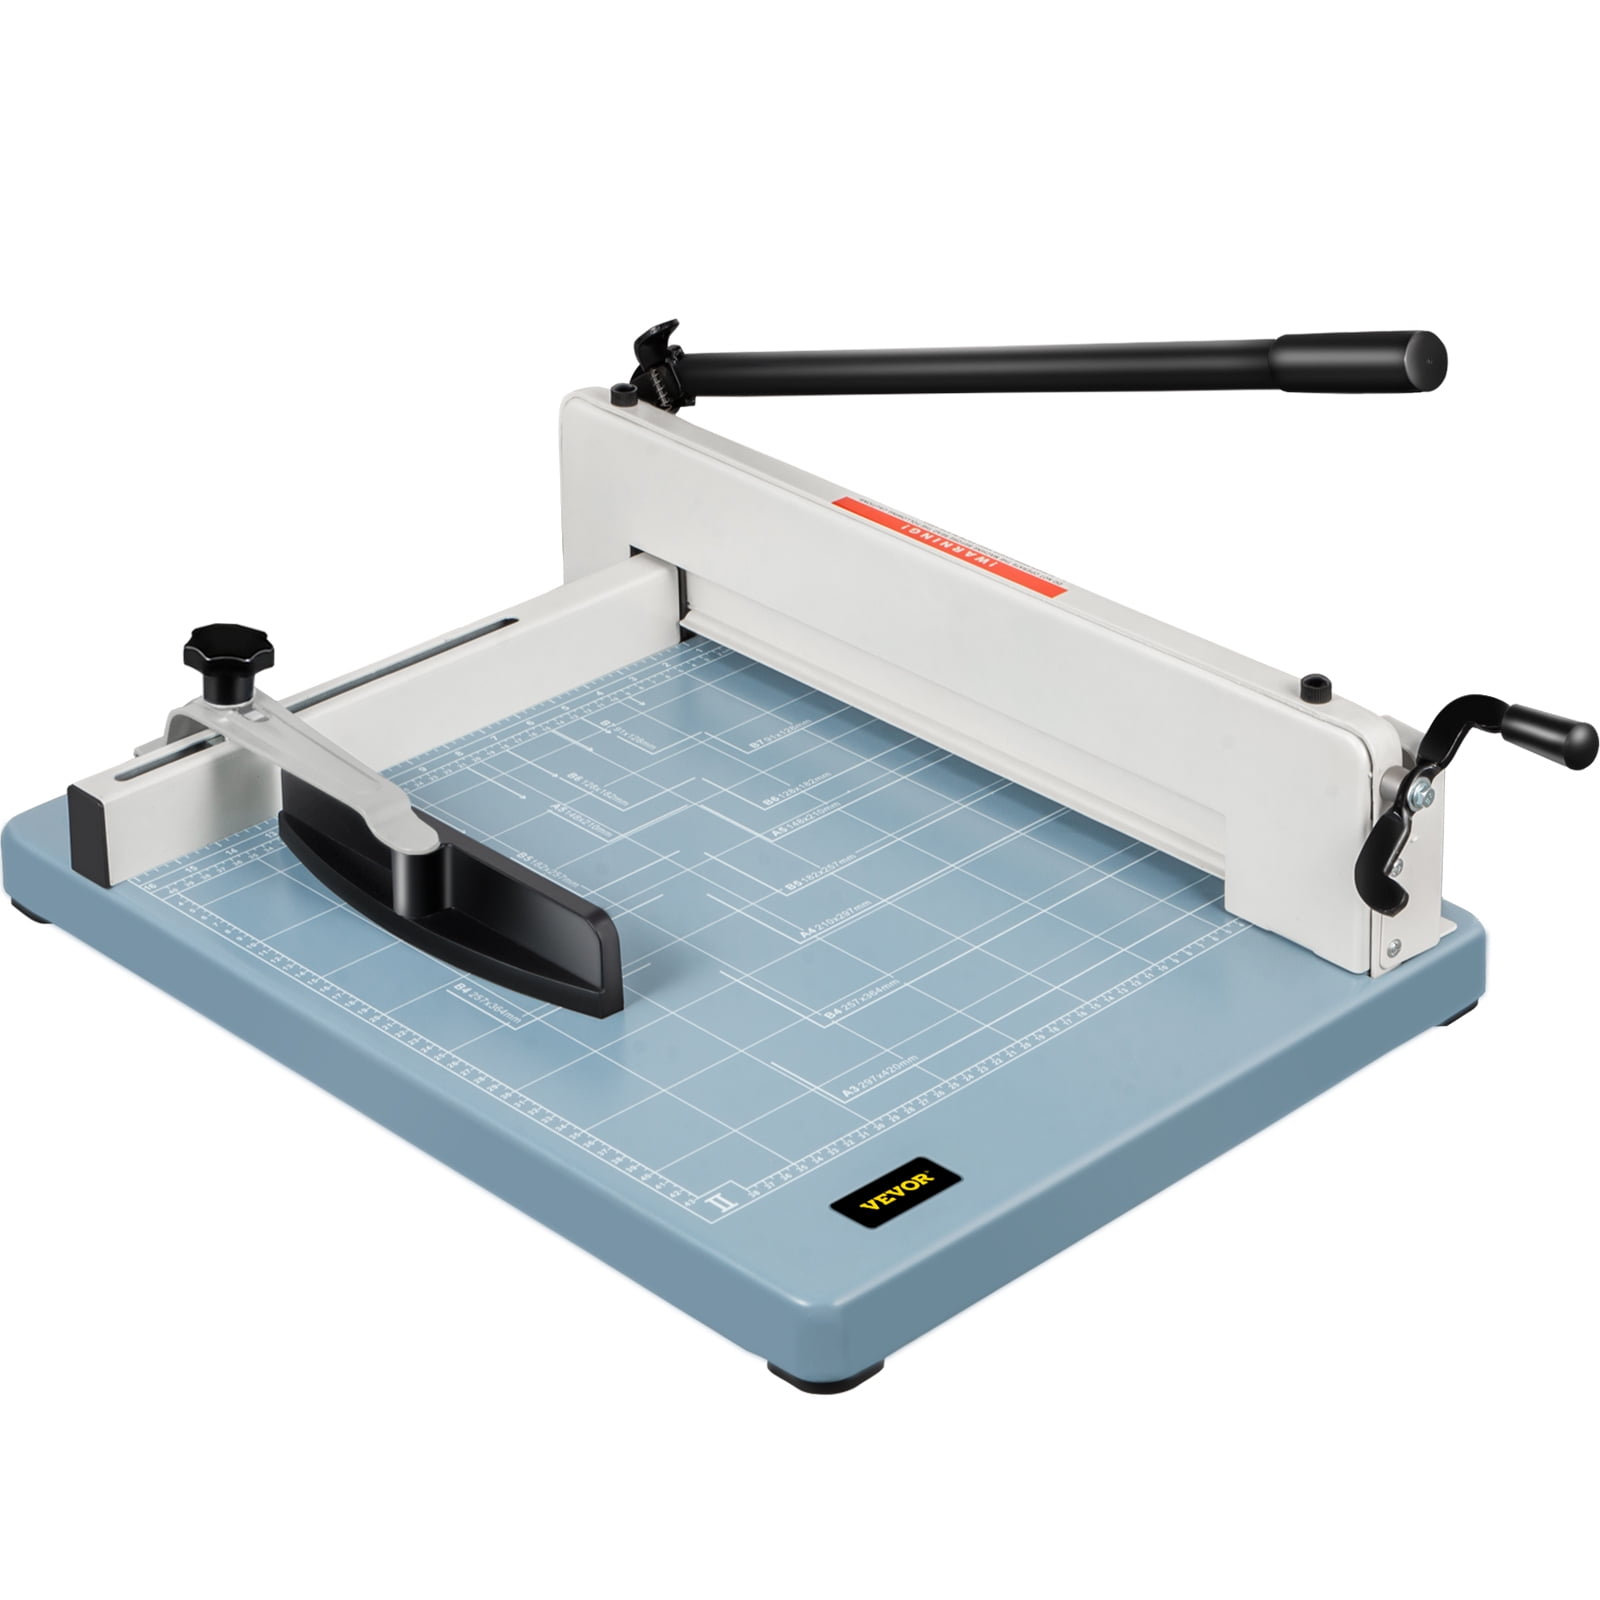 A4 to B7 OFFICE PROFESSIONAL PAPER CUTTER GUILLOTINE TRIMMER MACHINE SAFETY 